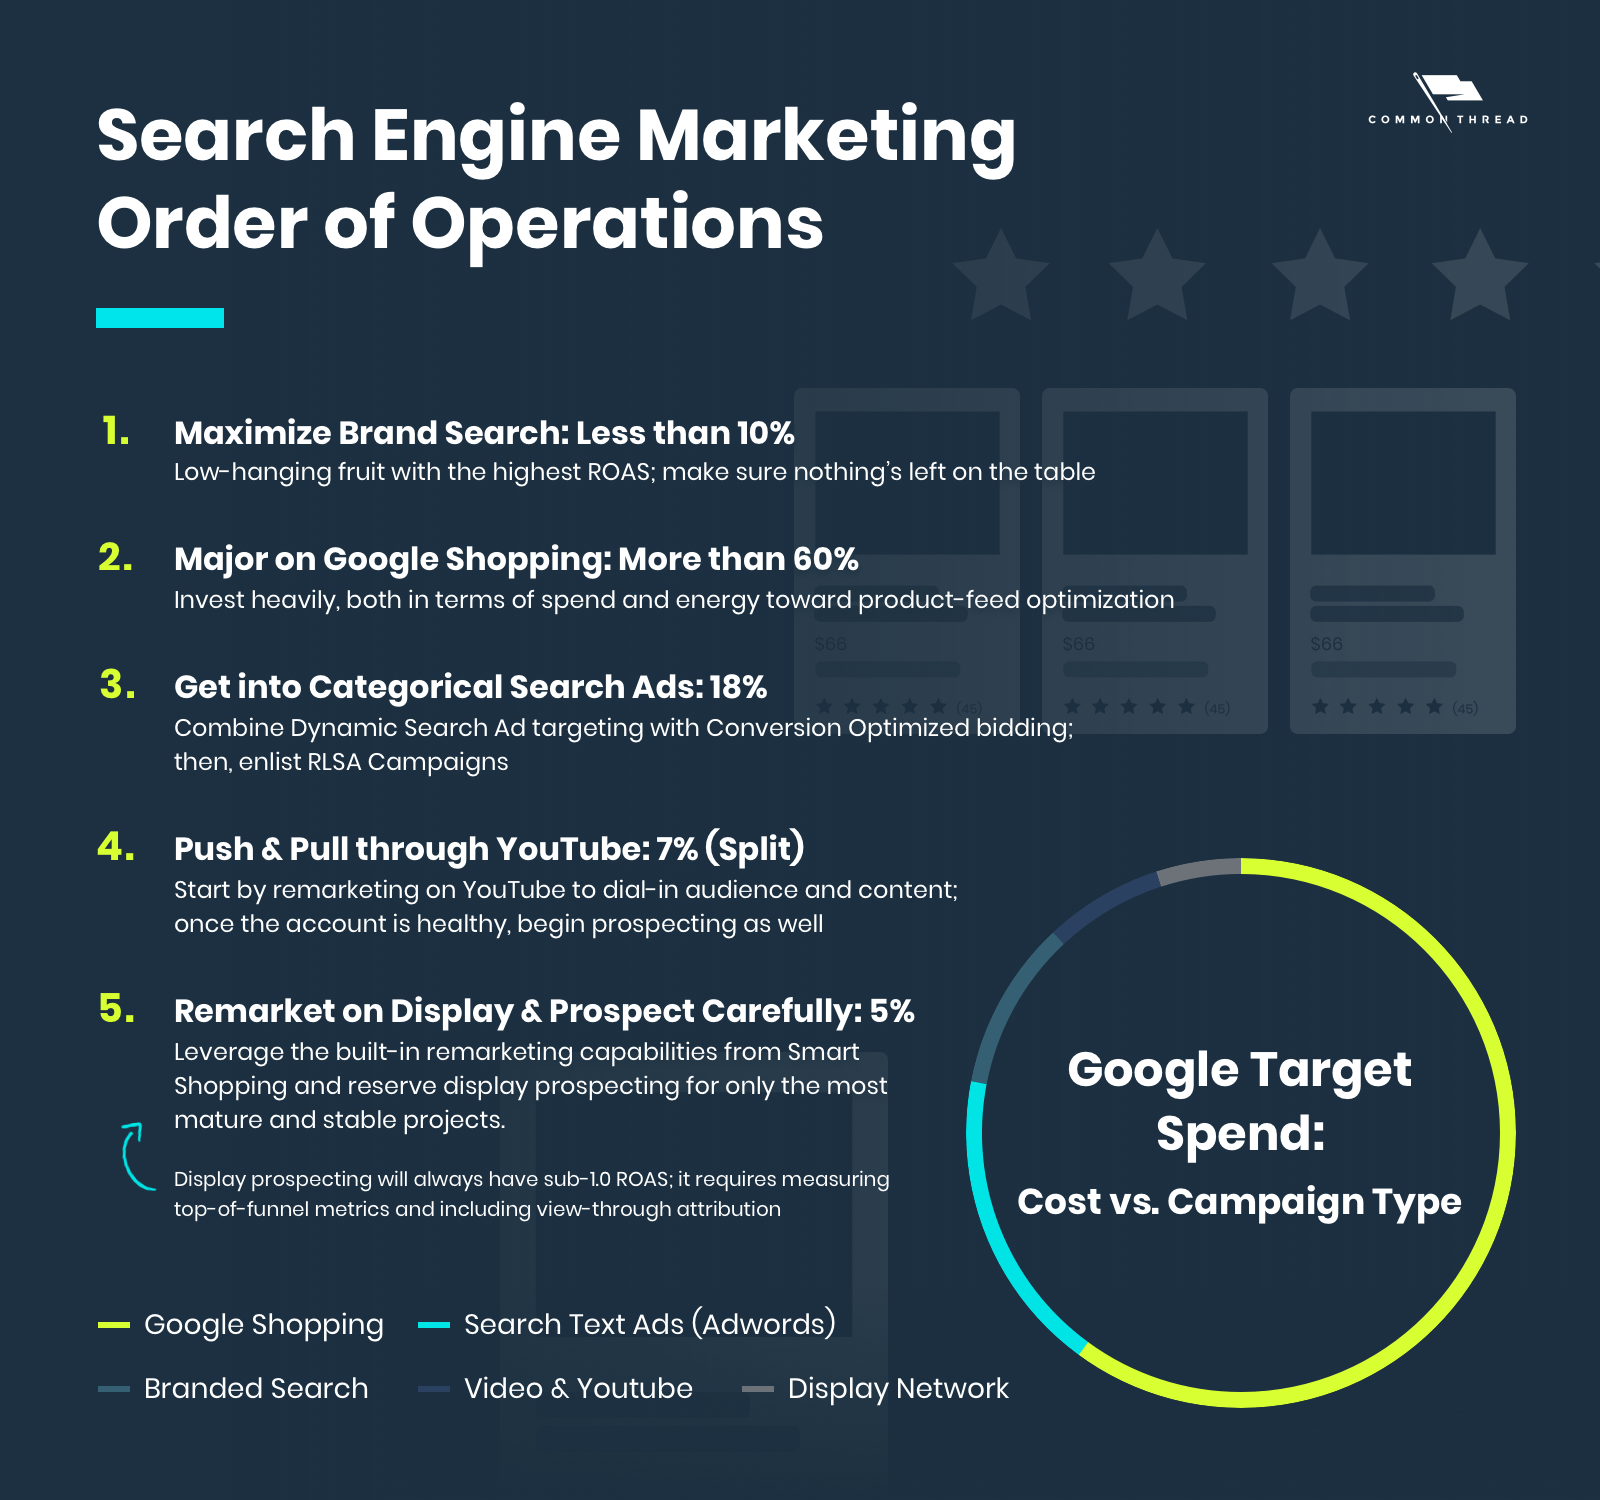 Search Engine Marketing Order of Operations: 1. Maximize Brand Search: Less than 10% - Low-hanging fruit with the highest ROAS; make sure nothing’s left on the table. 2. Major on Google Shopping: More than 60% - Invest heavily, both in terms of spend and energy toward product-feed optimization. 3. Get into Categorical Search Ads: 18% - Combine Dynamic Search Ad targeting with Conversion Optimized bidding; then, enlist RLSA Campaigns. 4. Push & Pull through YouTube: 7% (Split) - Start by remarketing on YouTube to dial-in audience and content; once the account is healthy, begin prospecting as well. 5. Remarket on Display & Prospect Carefully: 5% - Leverage the built-in remarketing capabilities from Smart Shopping and reserve display prospecting for only the most mature and stable projects. (Display prospecting will always have sub-1.0 ROAS; it requires measuring top-of-funnel metrics and including view-through attribution.) Summary: >60% Google Shopping Ads, 18% Search Text Ads (Adwords), <10% Branded Search Terms, 7% Video and YouTube, and 5% Display Network